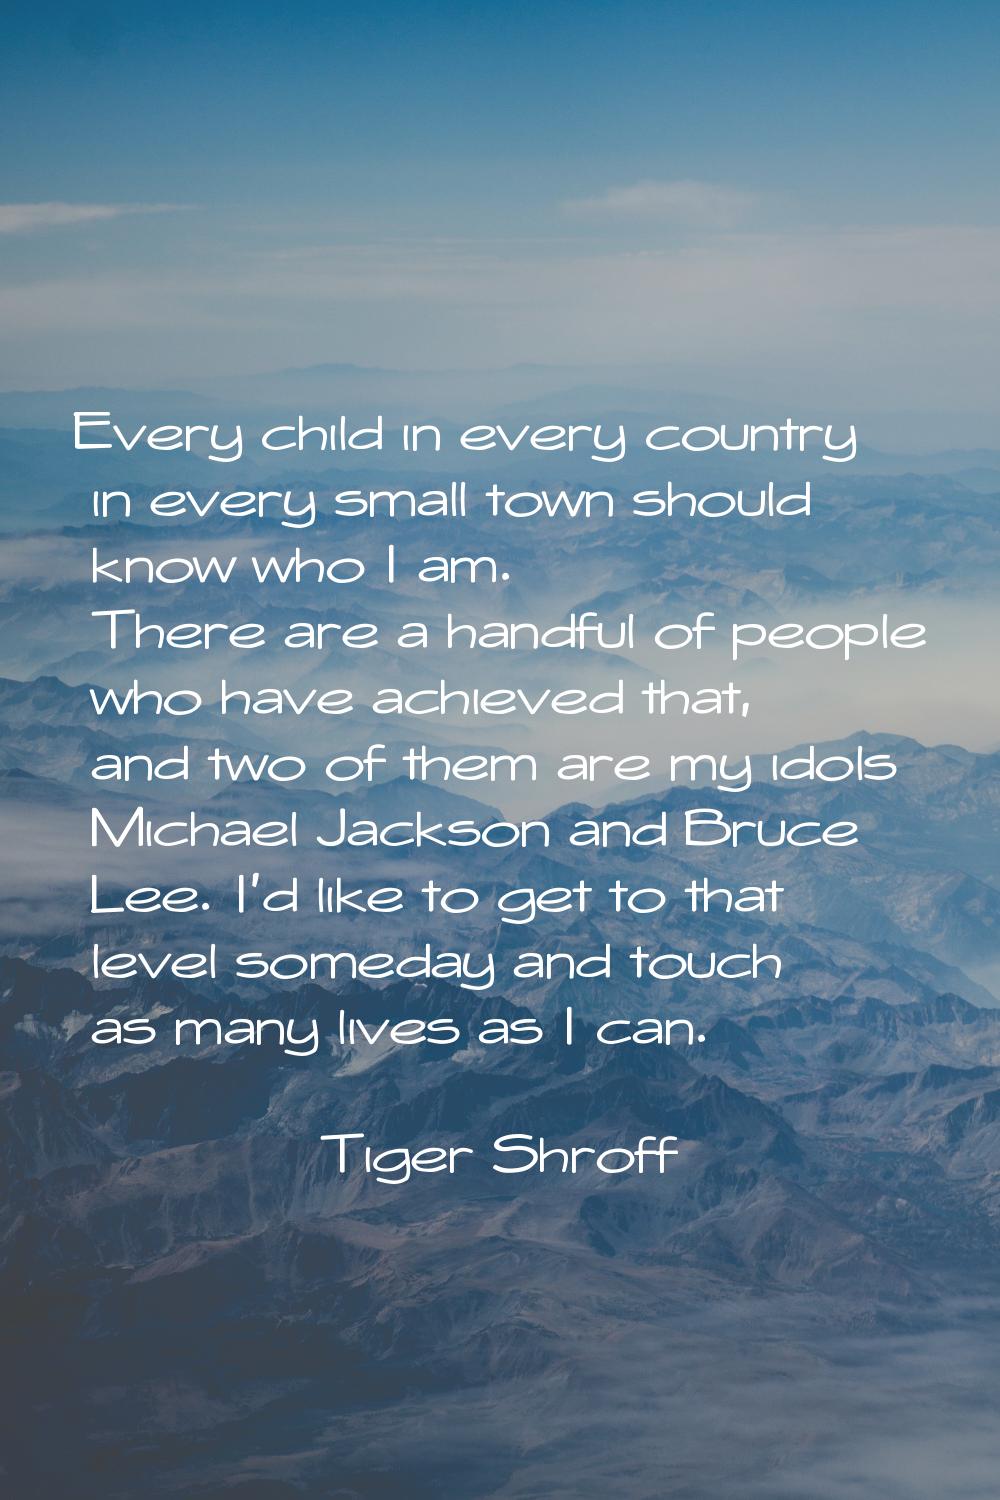 Every child in every country in every small town should know who I am. There are a handful of peopl